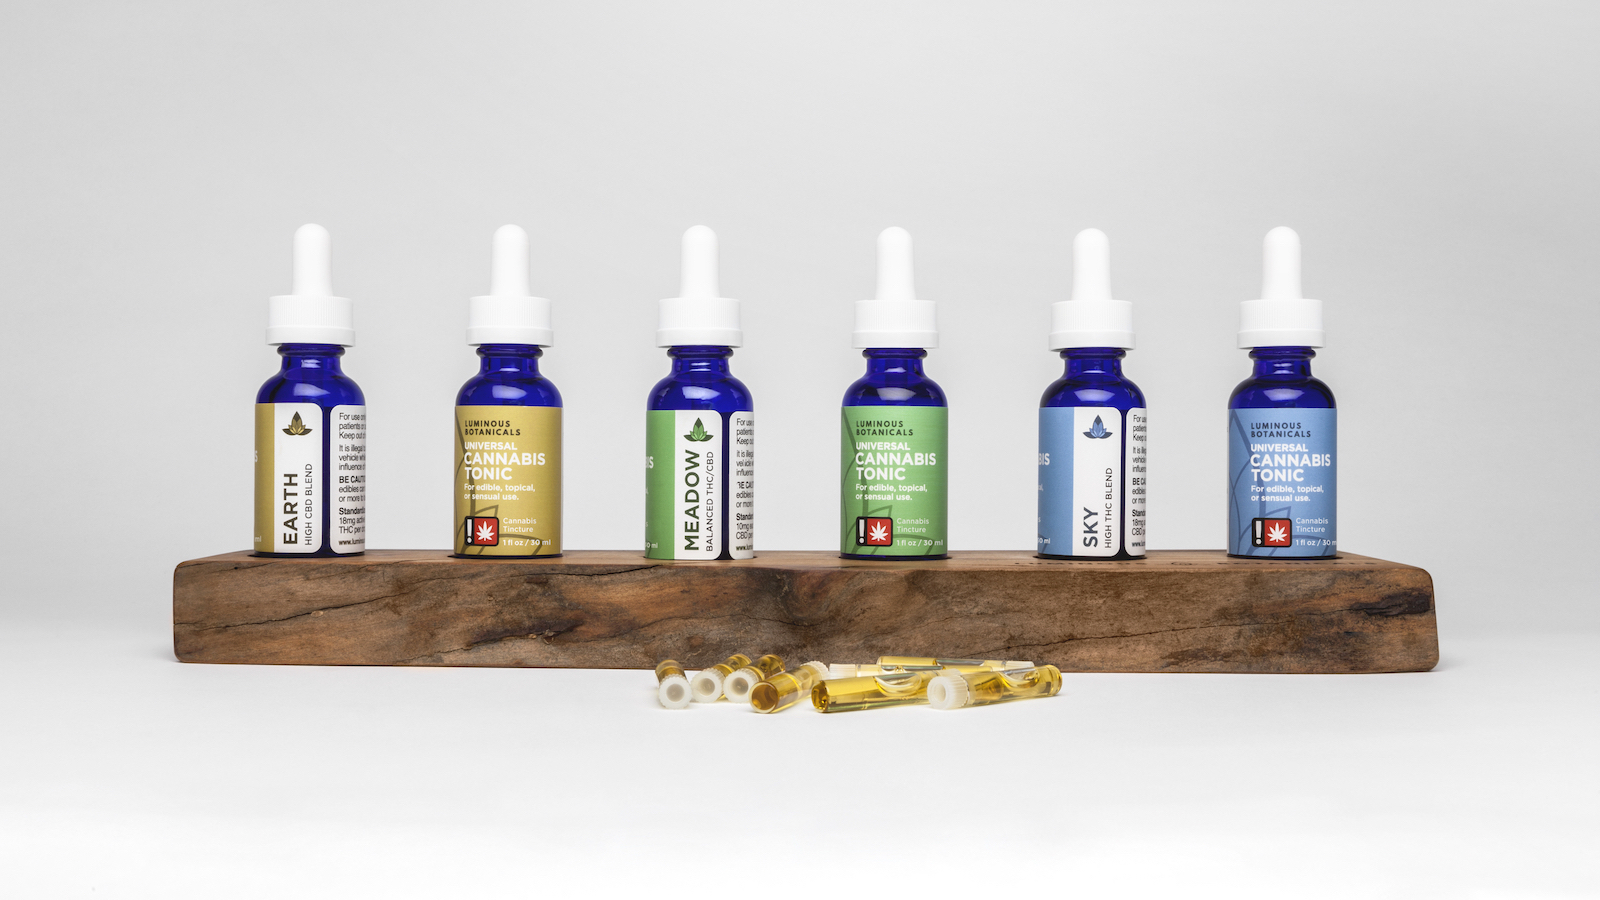 Six bottles of cannabis tonic displayed so two sides of each label can be seen. Each label has the product name listed horizontally over a color field, and the blend vertically over a white column.